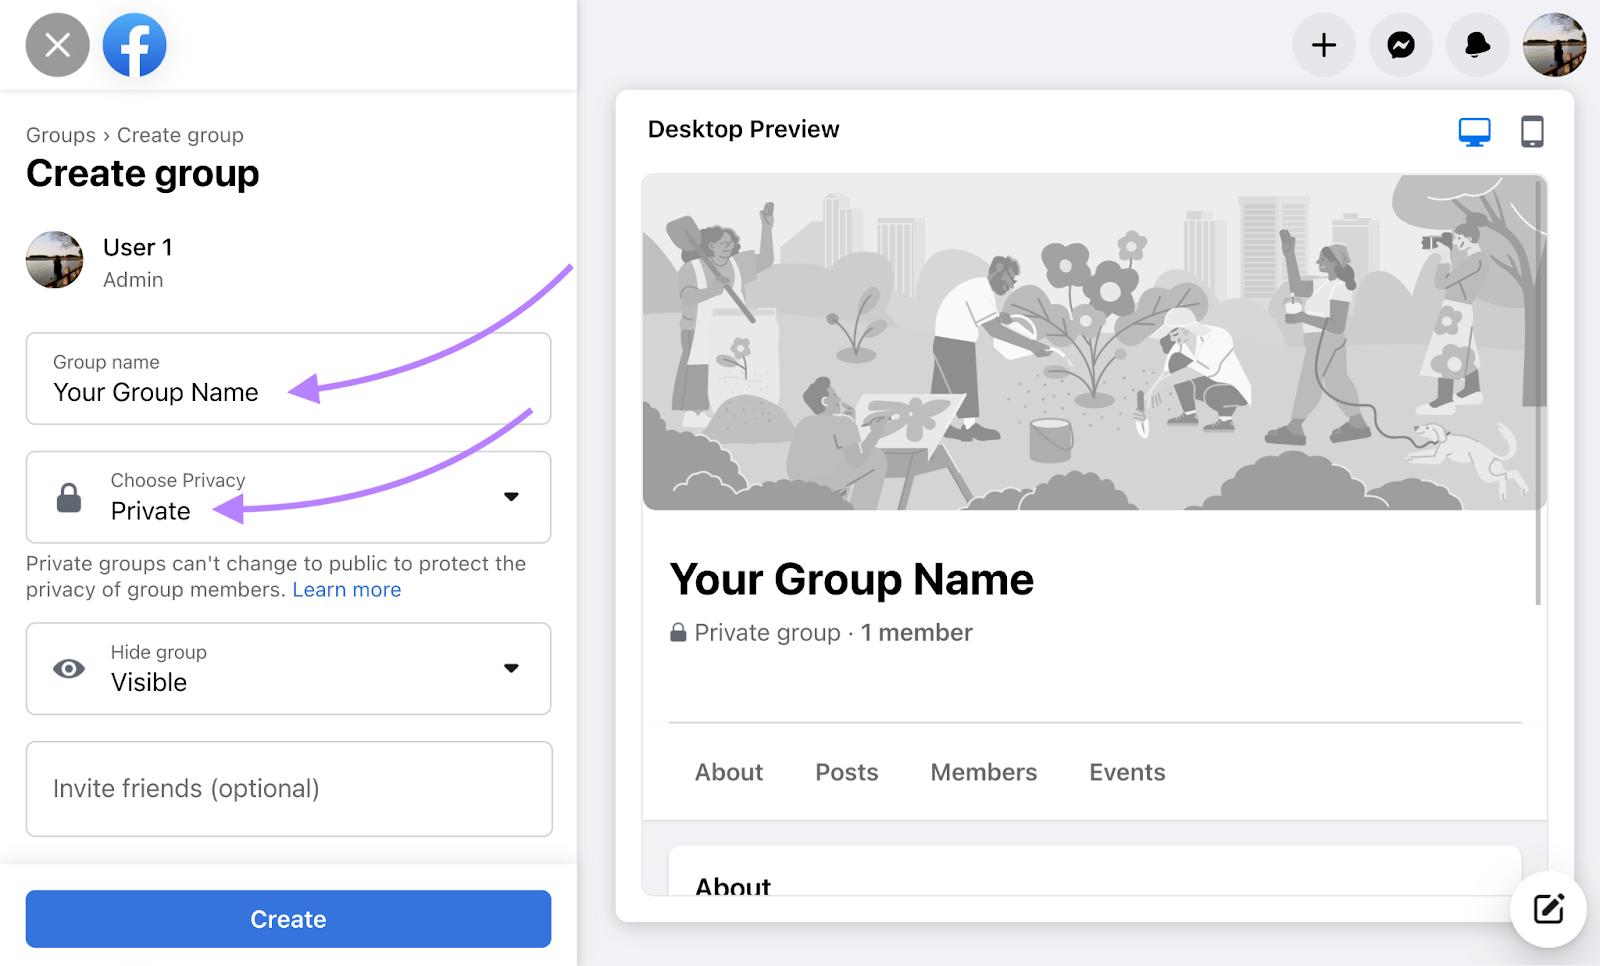 Group name and Choose privacy options